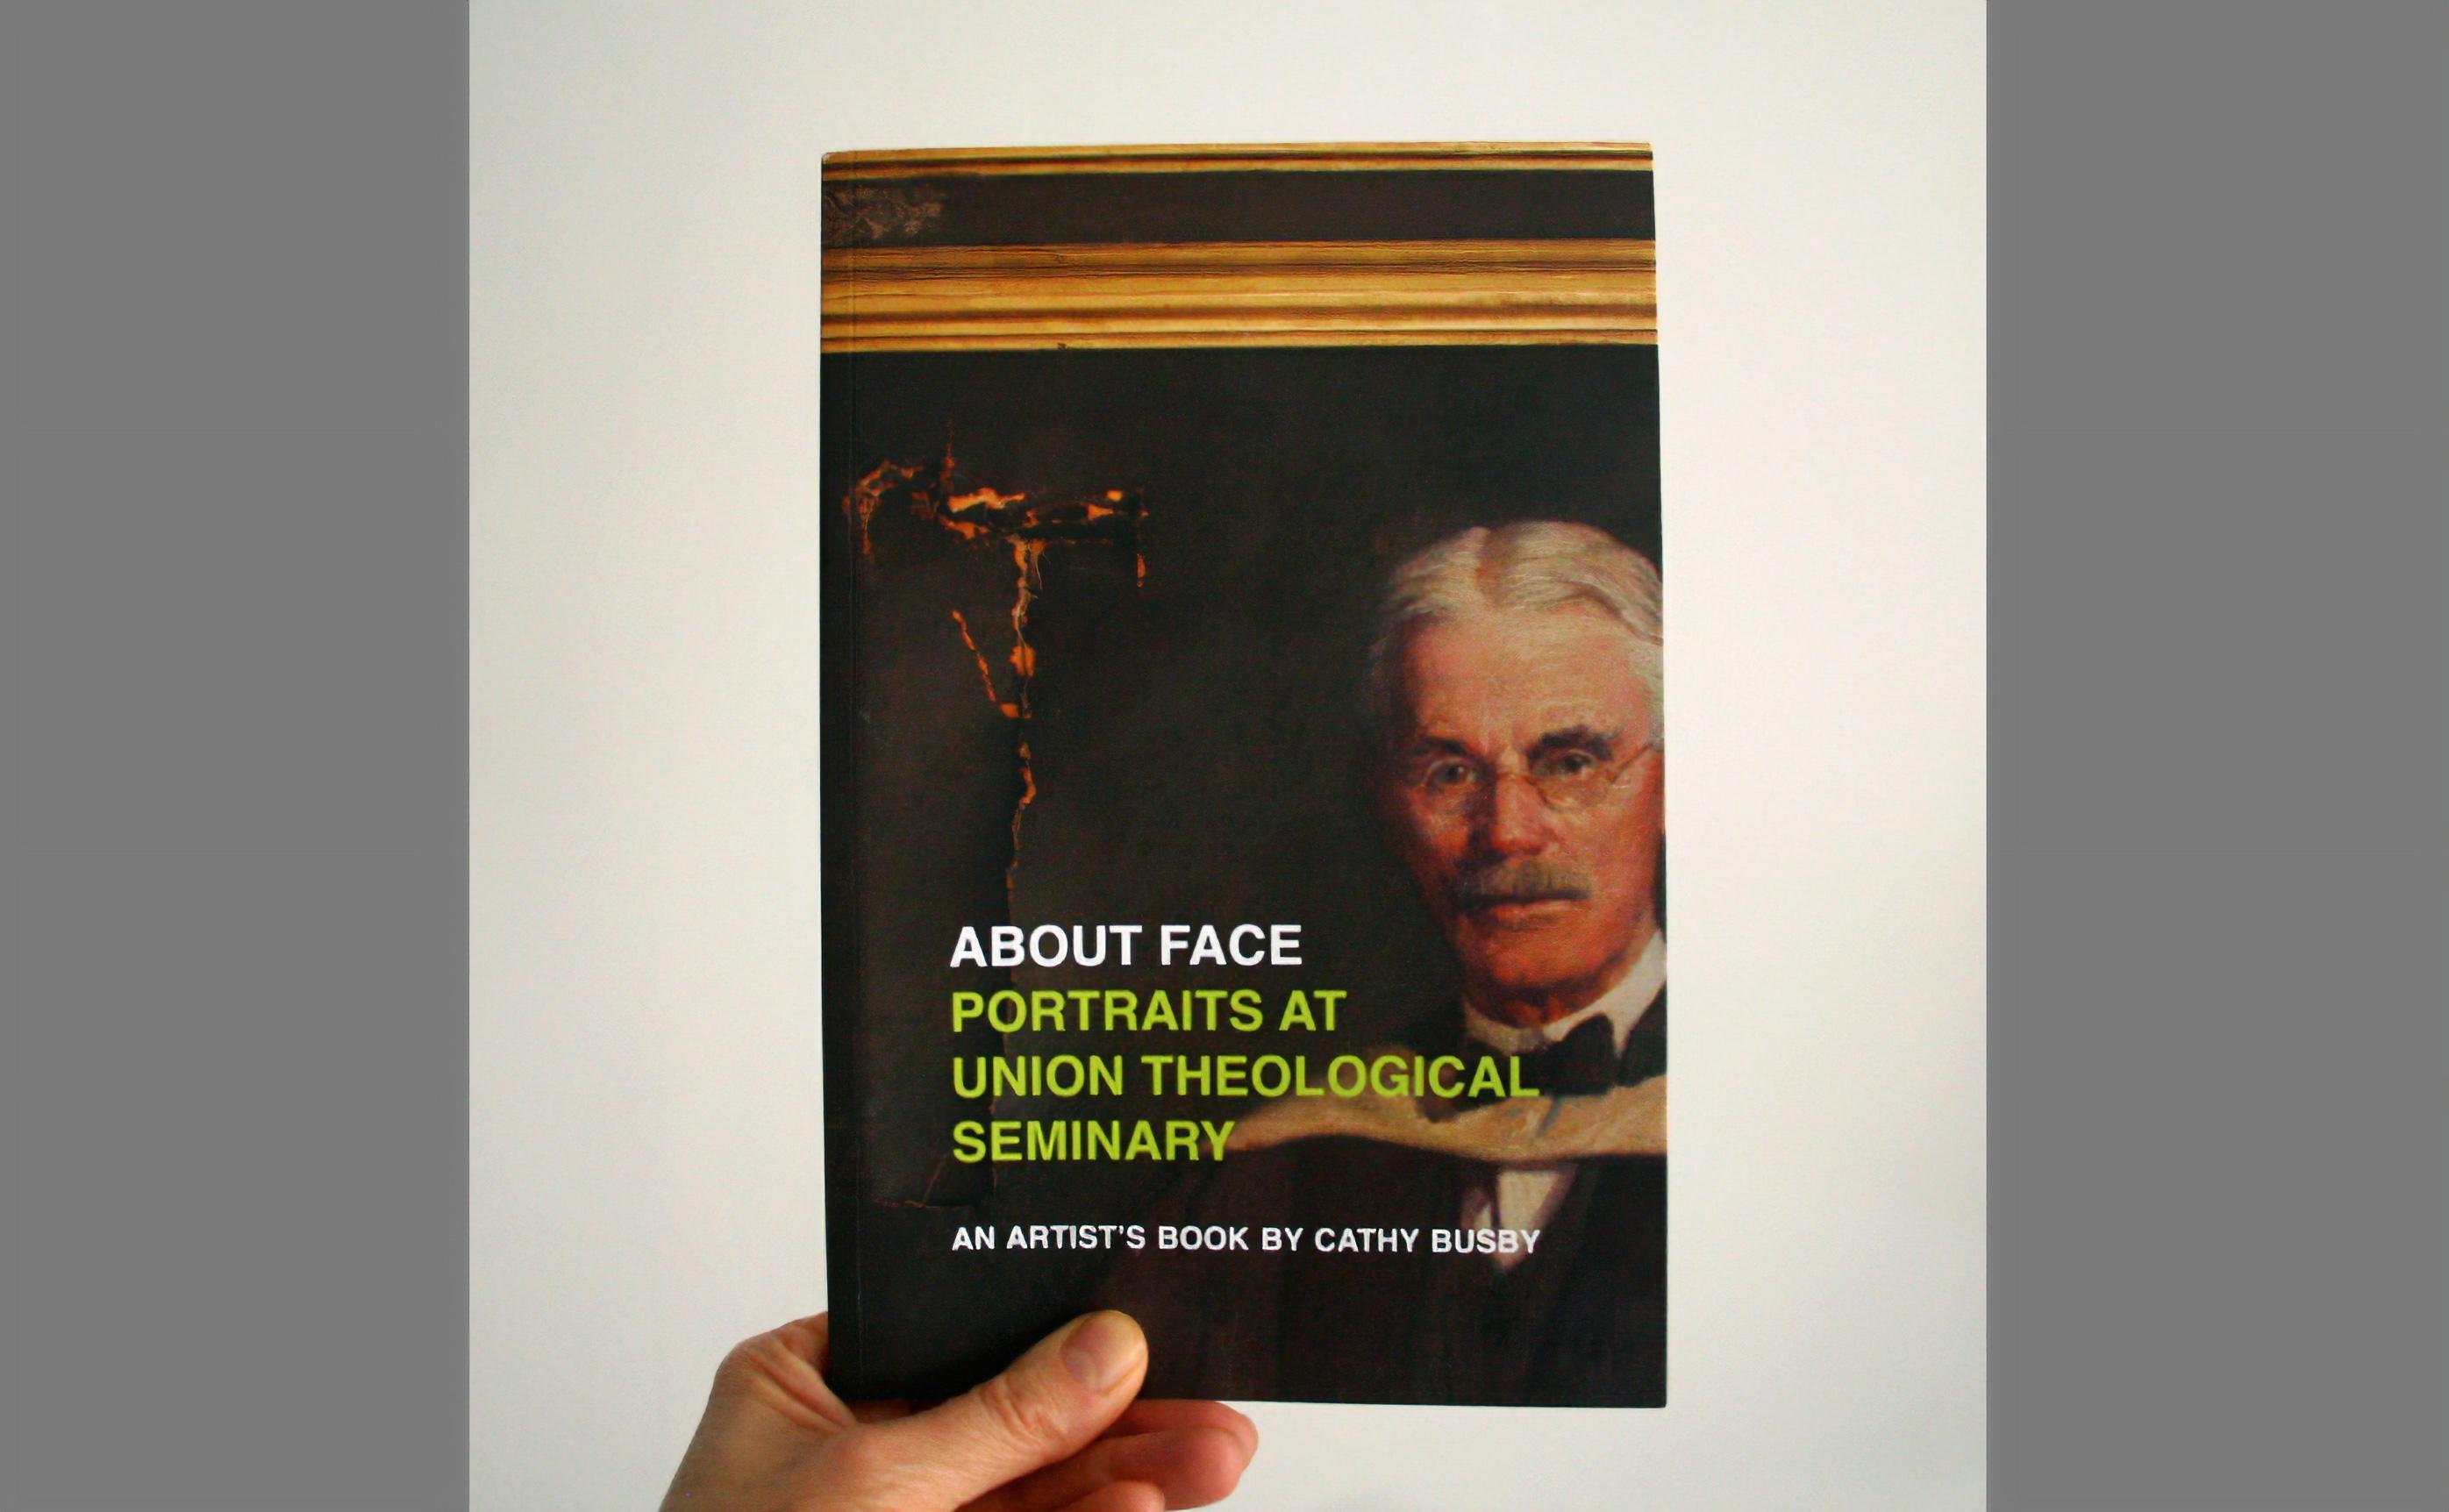 About Face book cover, Institute of Art, Religion, & Social Justice, Union Theological Seminary, New York, 2012